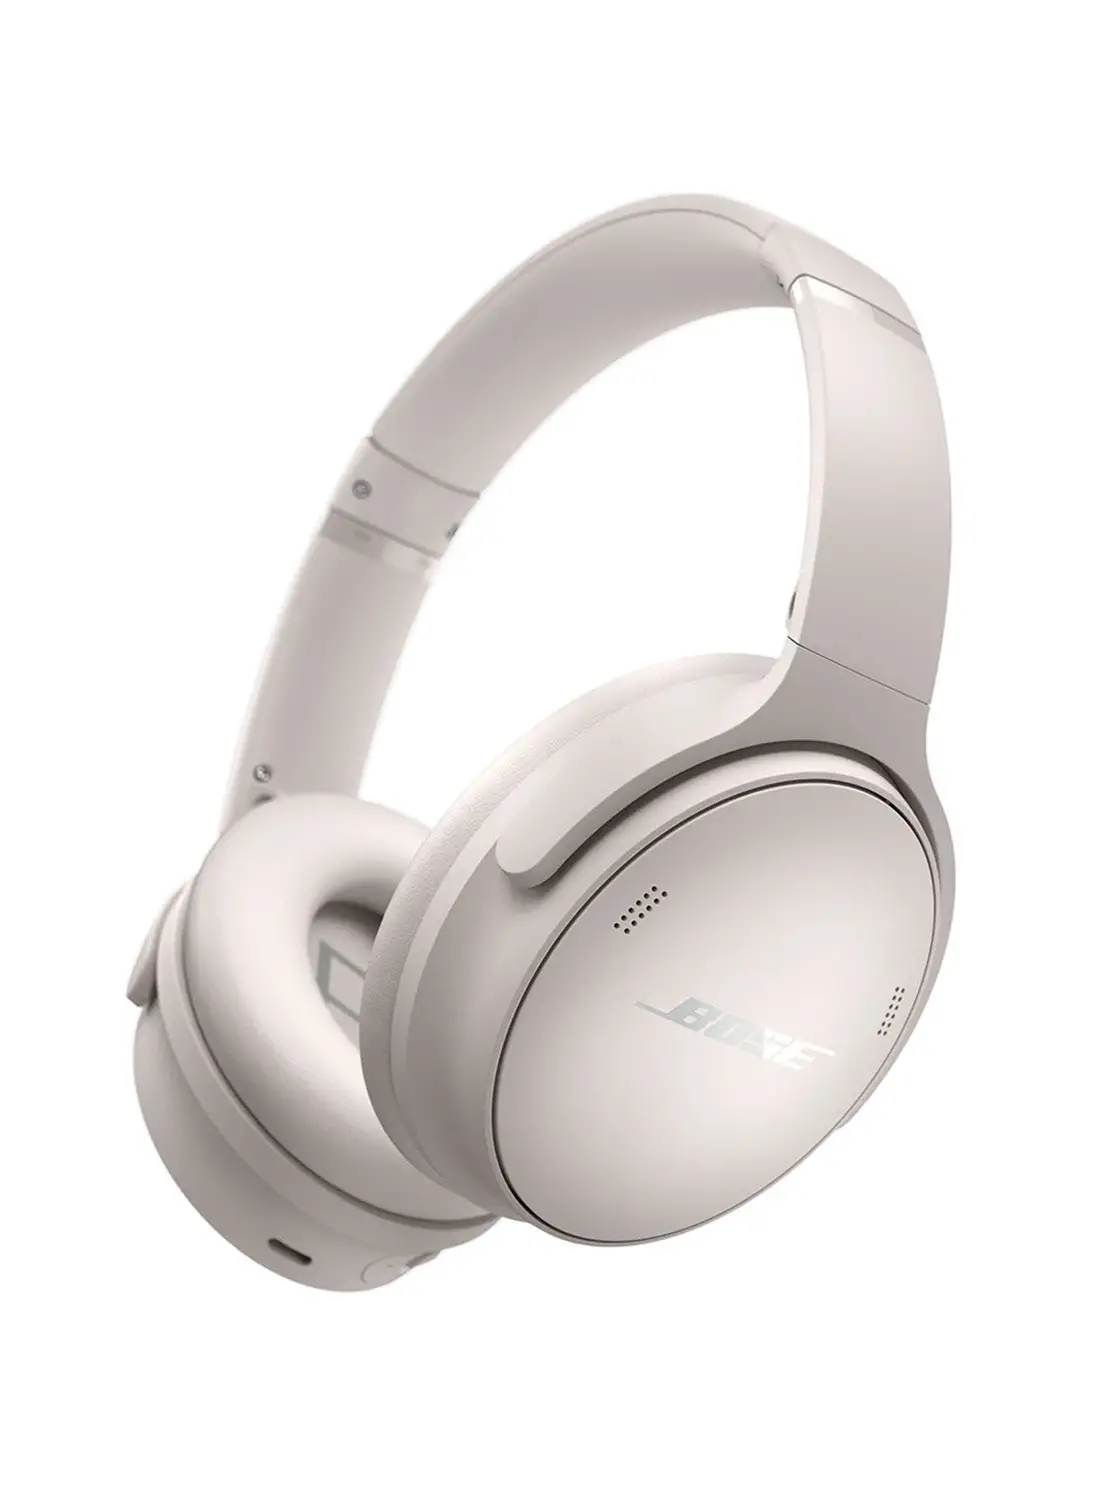 BOSE QuietComfort Wireless Noise Cancelling Headphones Bluetooth Over Ear Headphones with Up To 24 Hours of Battery Life White